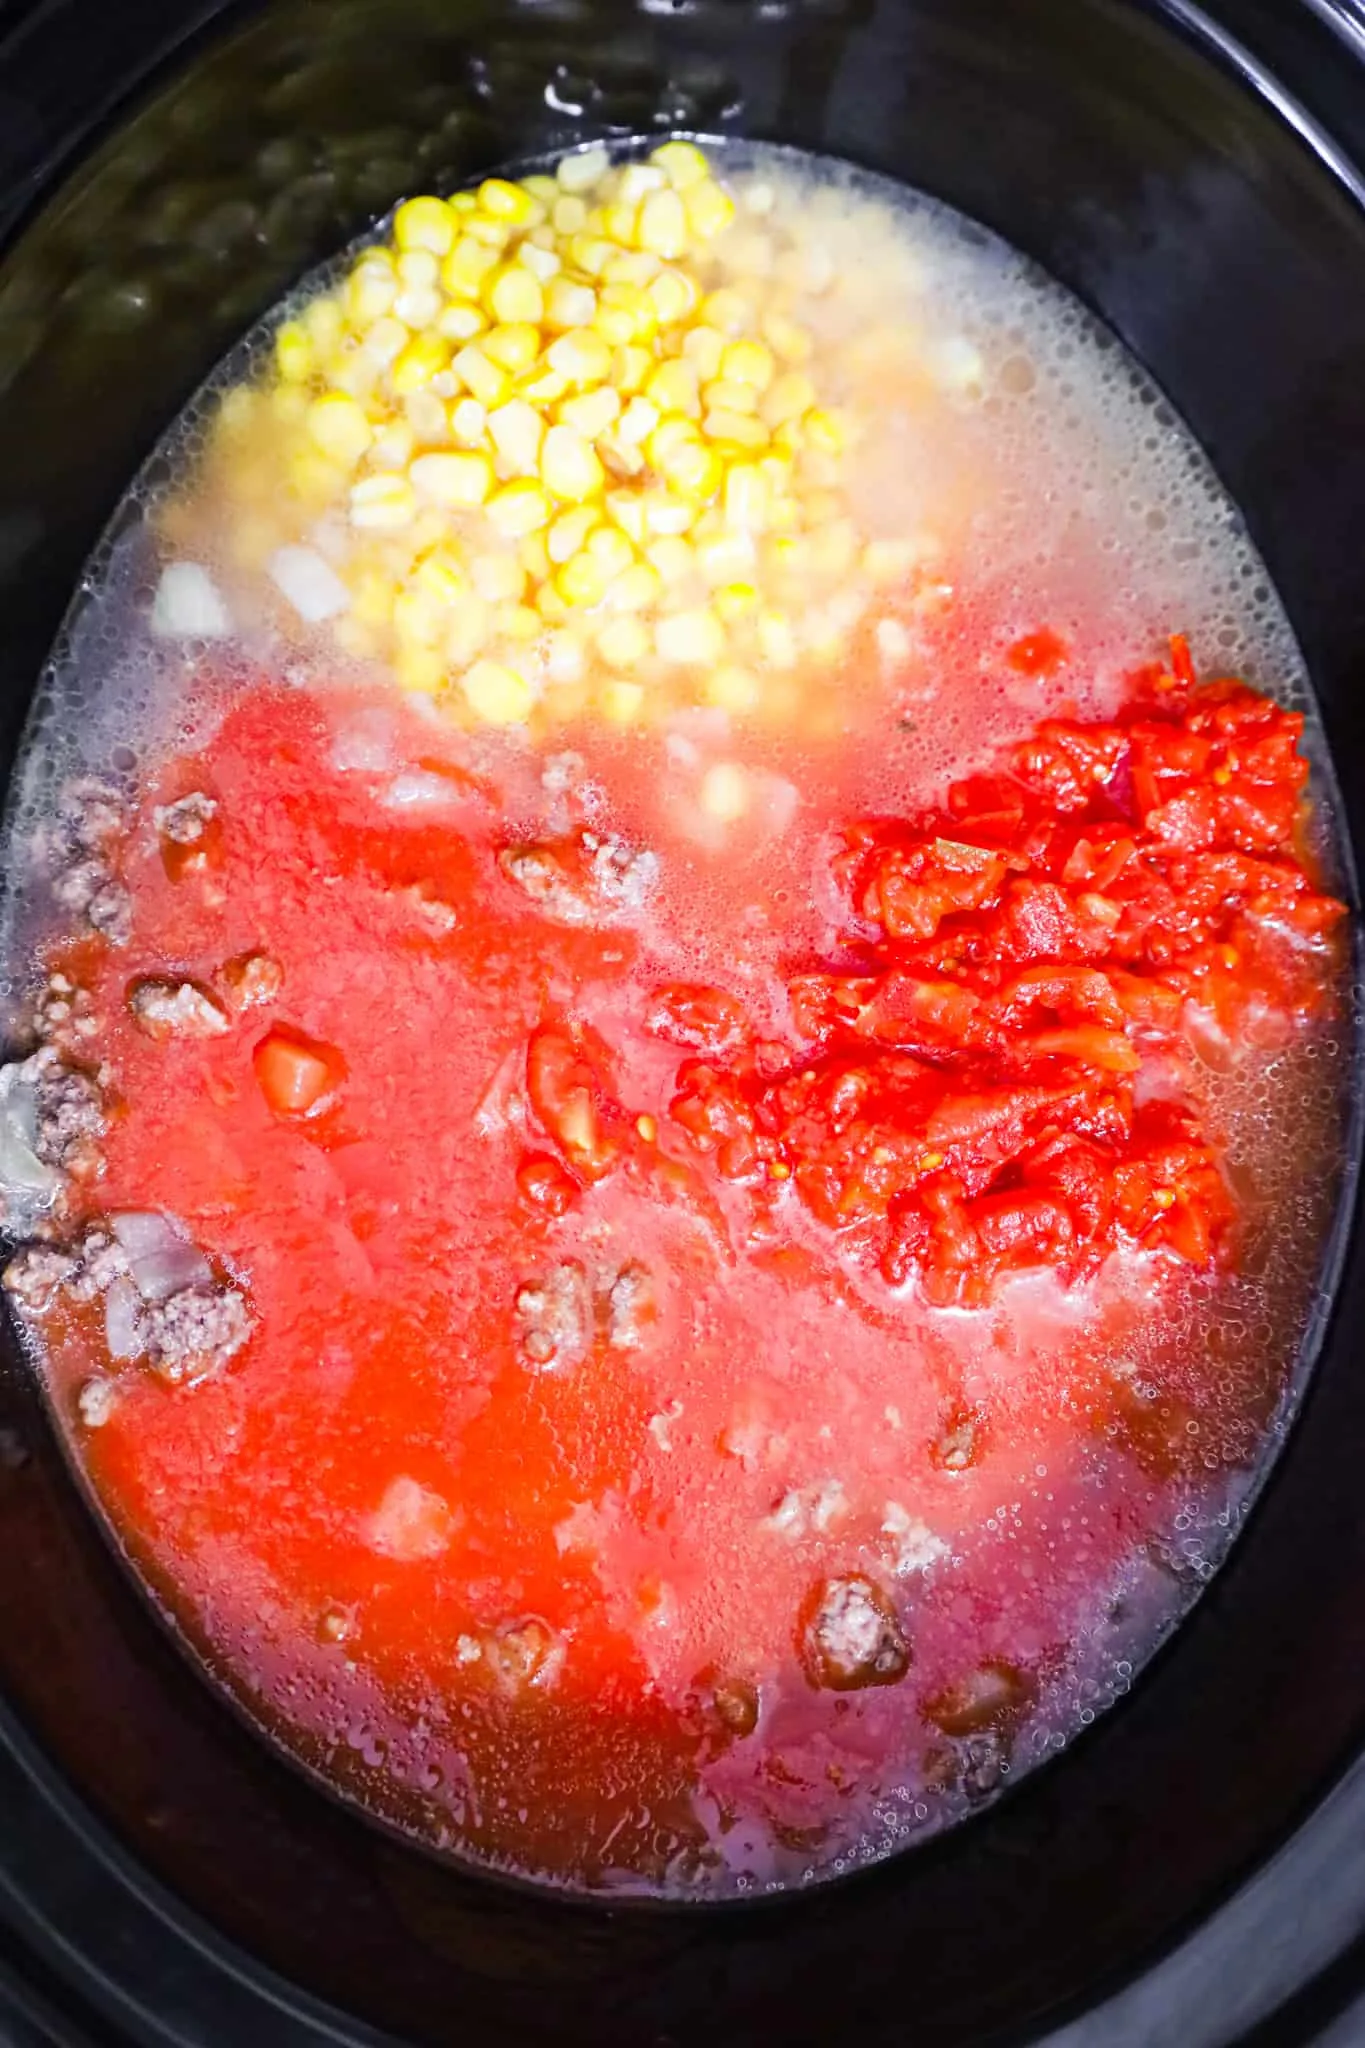 corn, Rotel diced tomatoes and tomato sauce on top of ground beef in a crock pot